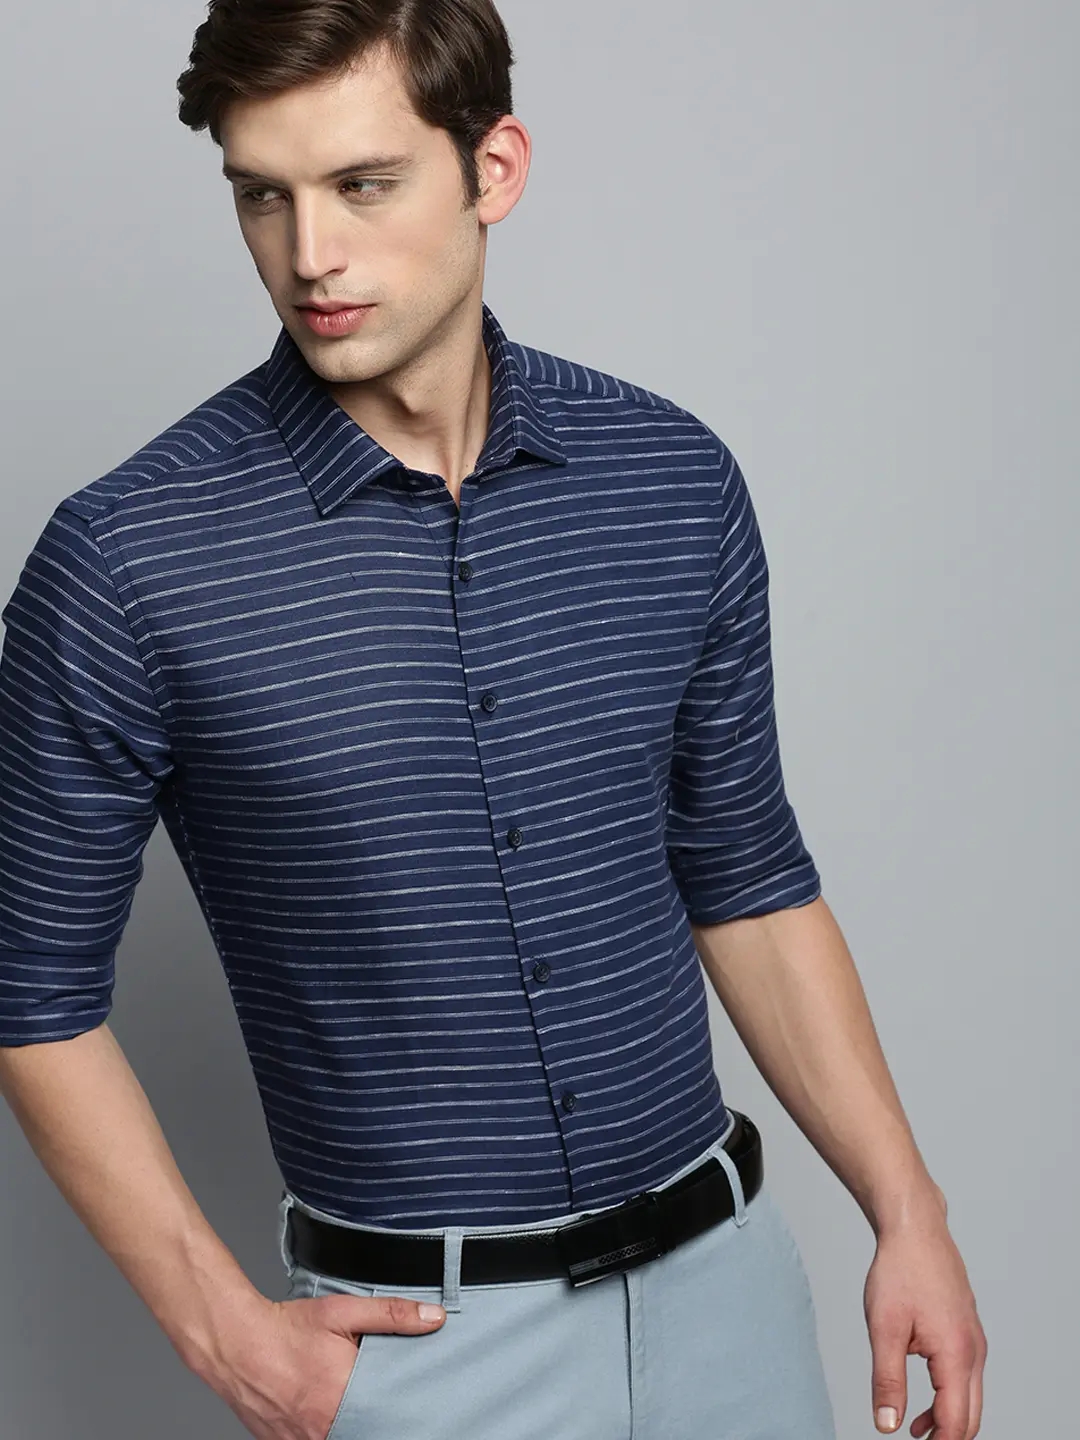 SHOWOFF Men's Spread Collar Striped Navy Blue Classic Shirt